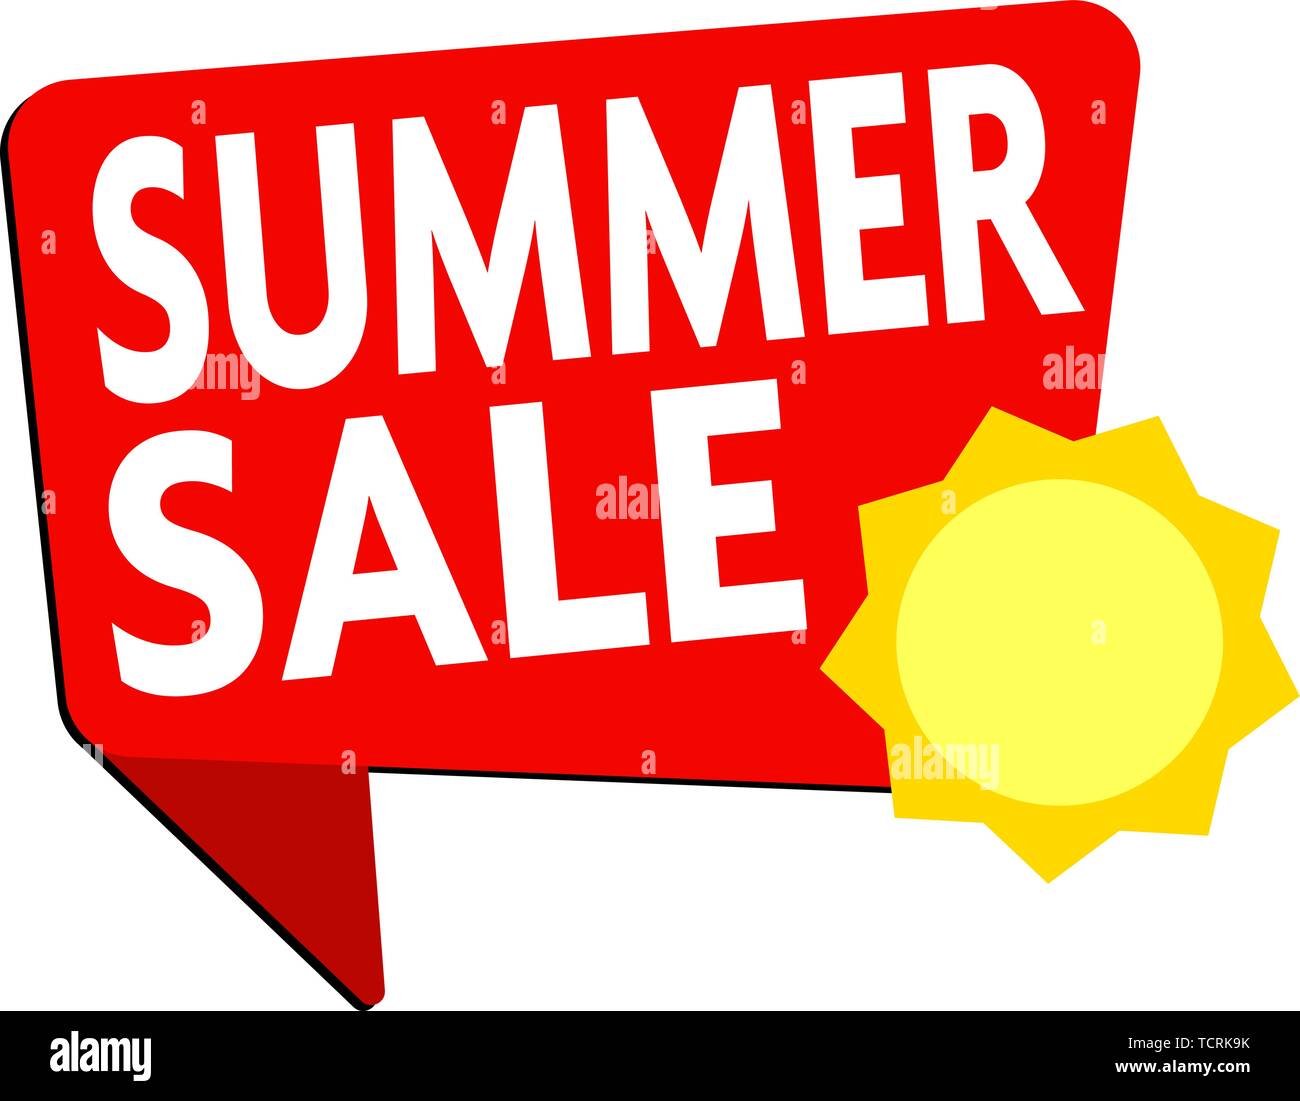 red summer sale banner or badge with sun icon vector illustration Stock Vector